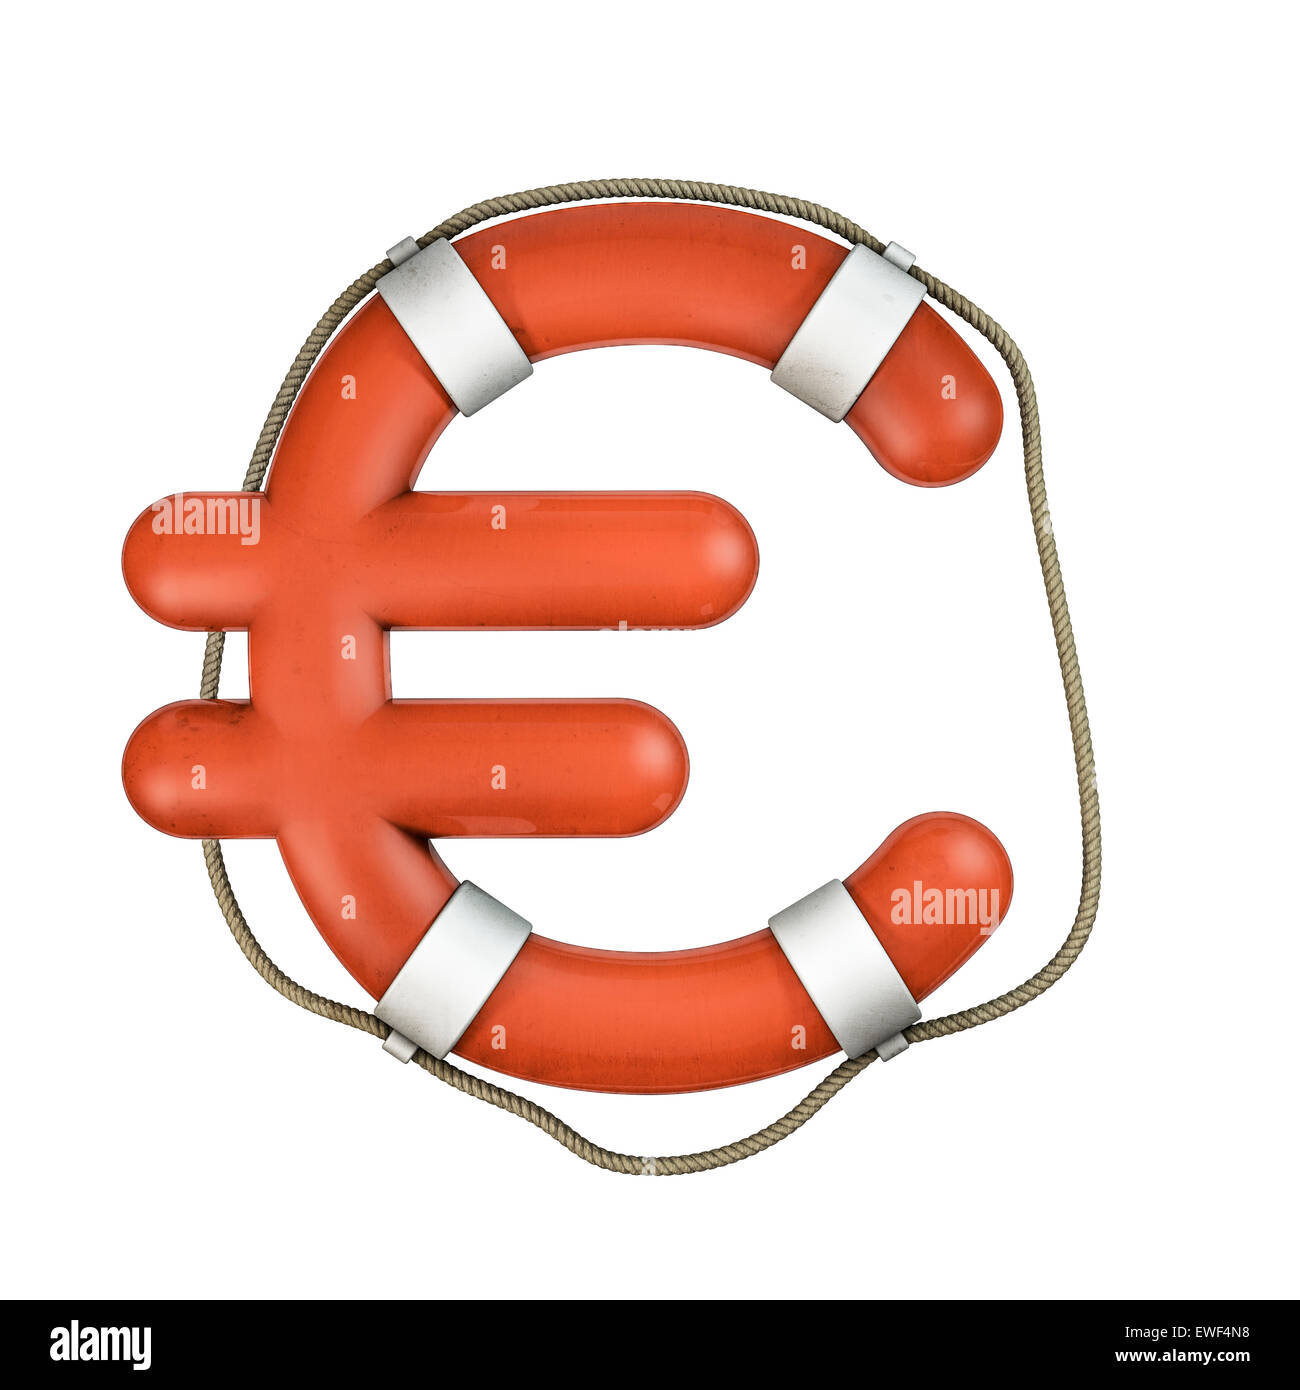 3D render of euro symbol shaped life ring Stock Photo